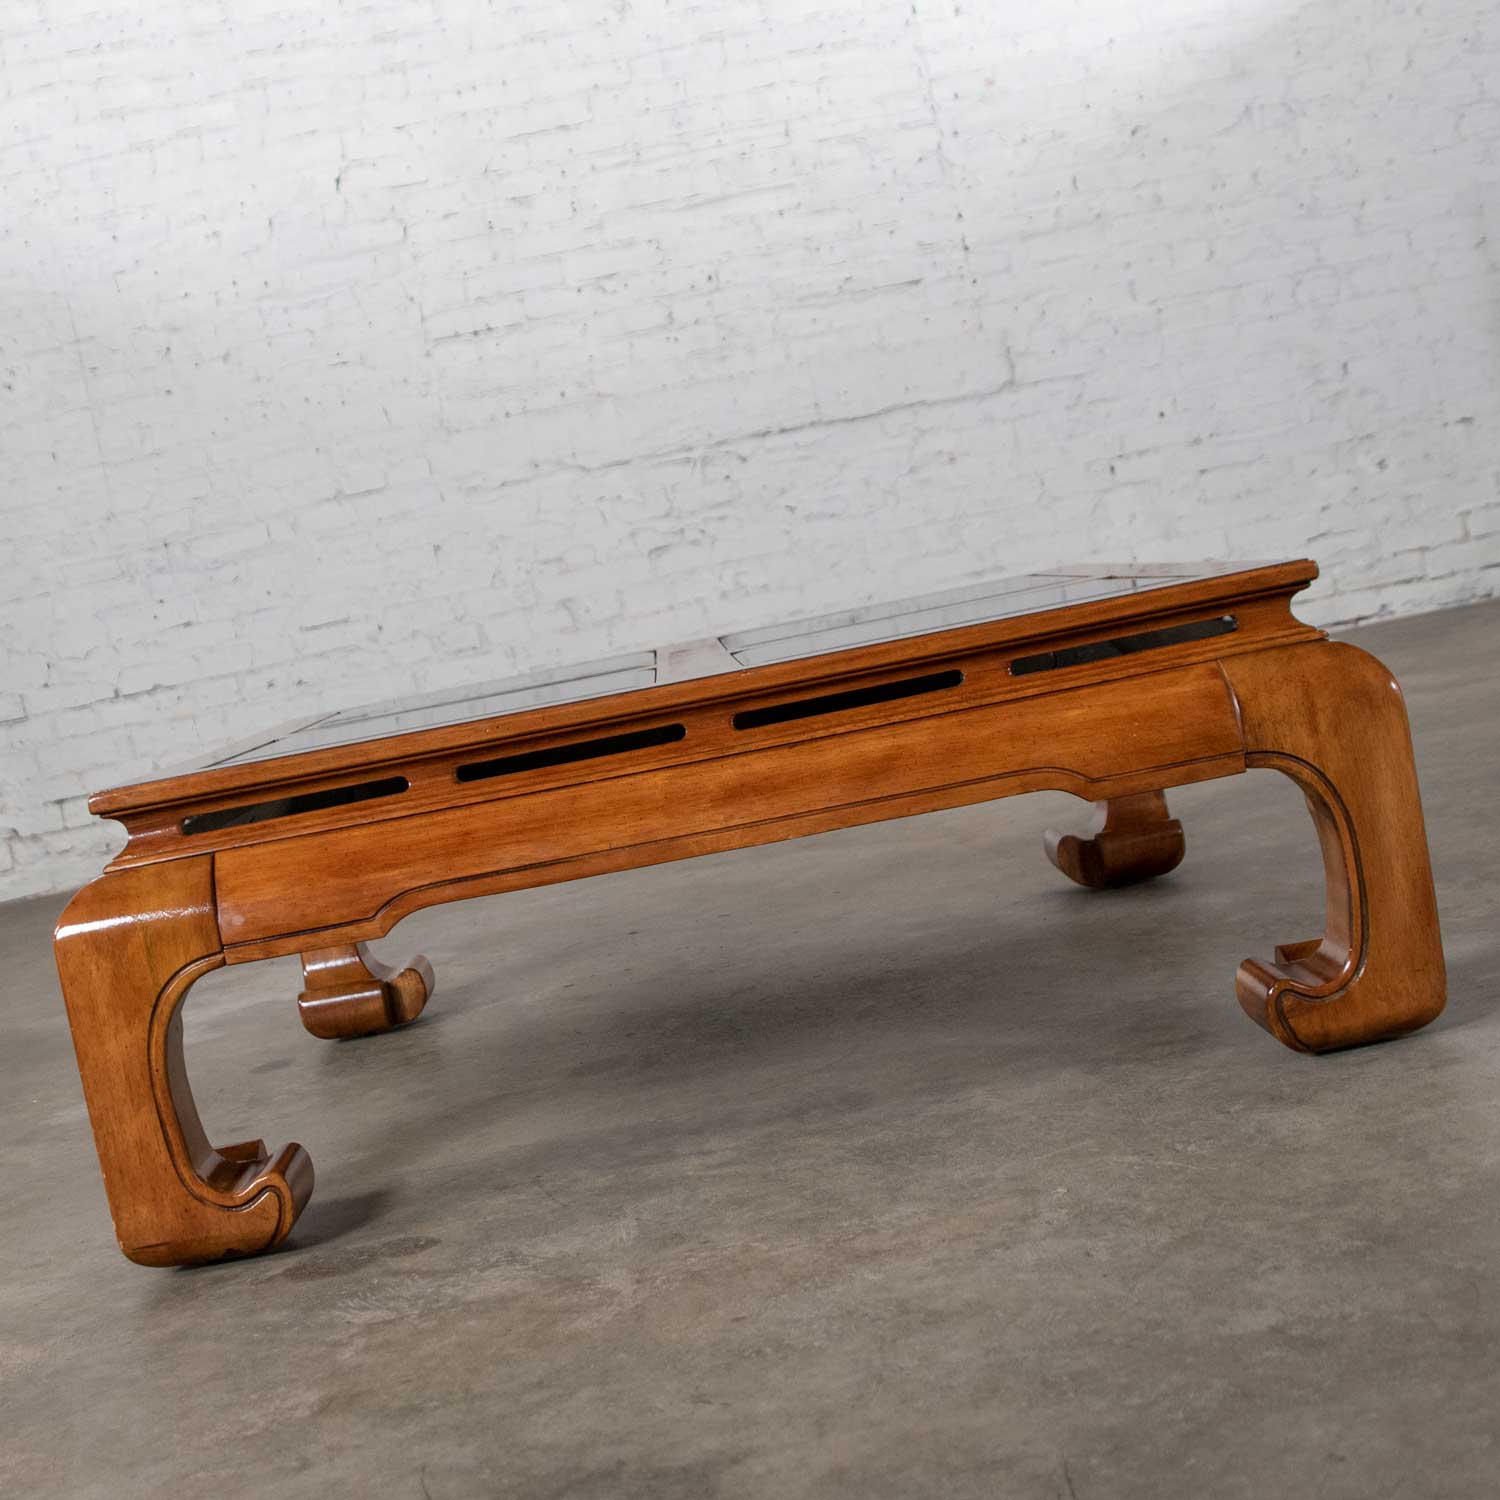 Chinoiserie Chow Leg Ming Style Large Square Coffee Table Attributed to Schnadig Intl. Furniture